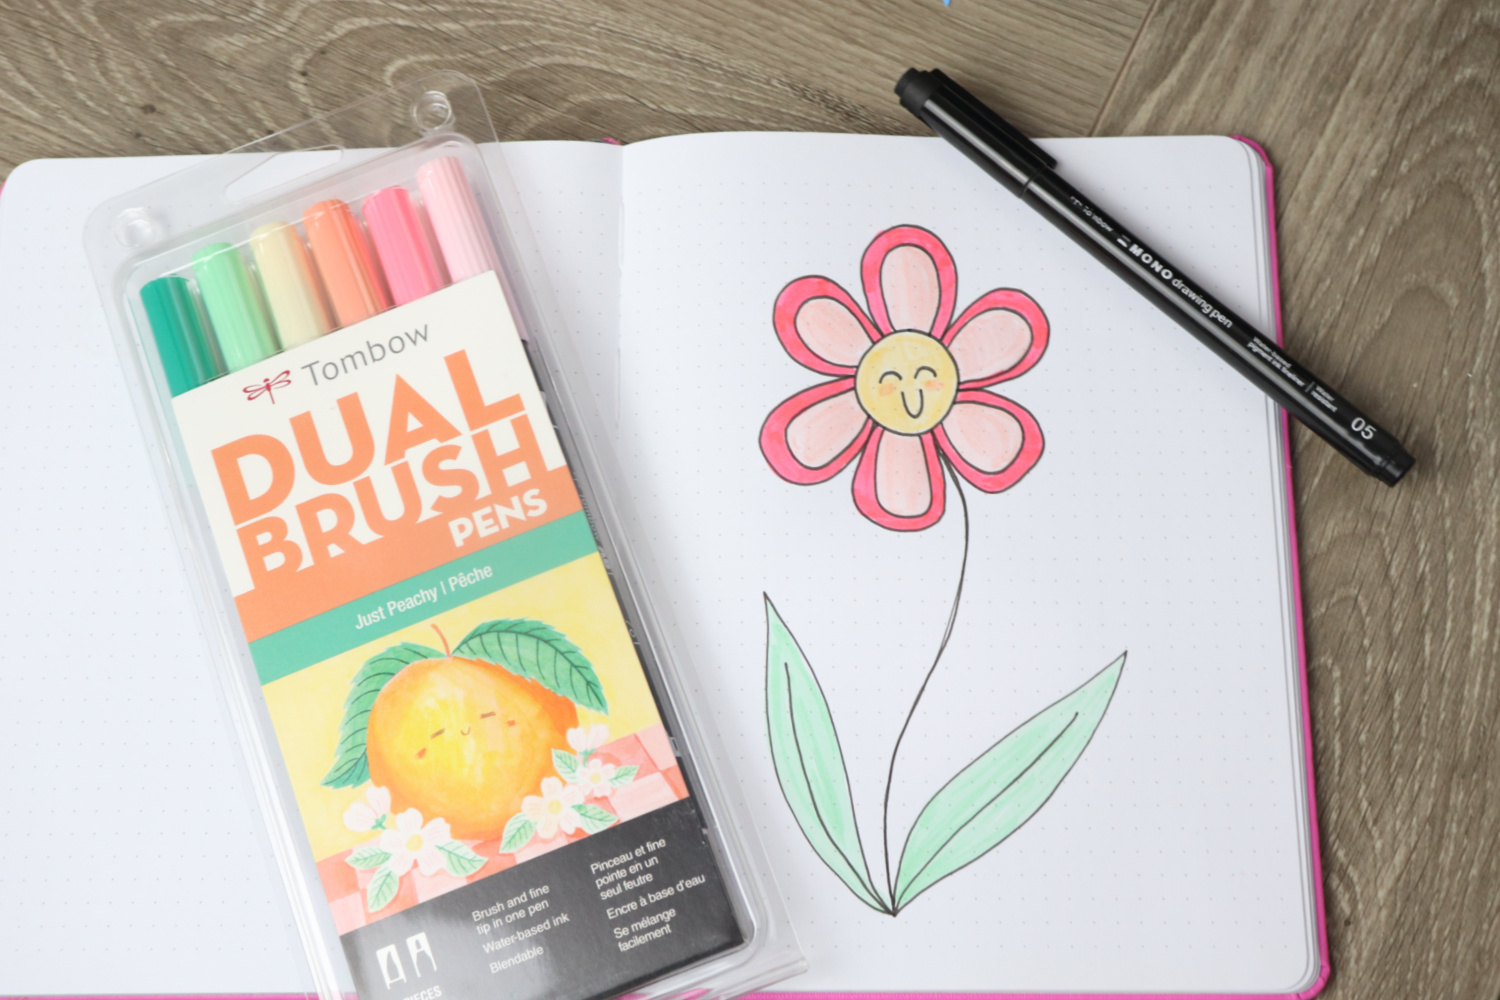 Image contains an open sketchbook on a wooden desk, with a large flower drawn on the page. It is colored pink, yellow, and green. A pack of Just Peachy Dual Brush Pens and a MONO Drawing Pen sit on top of the sketchbook.